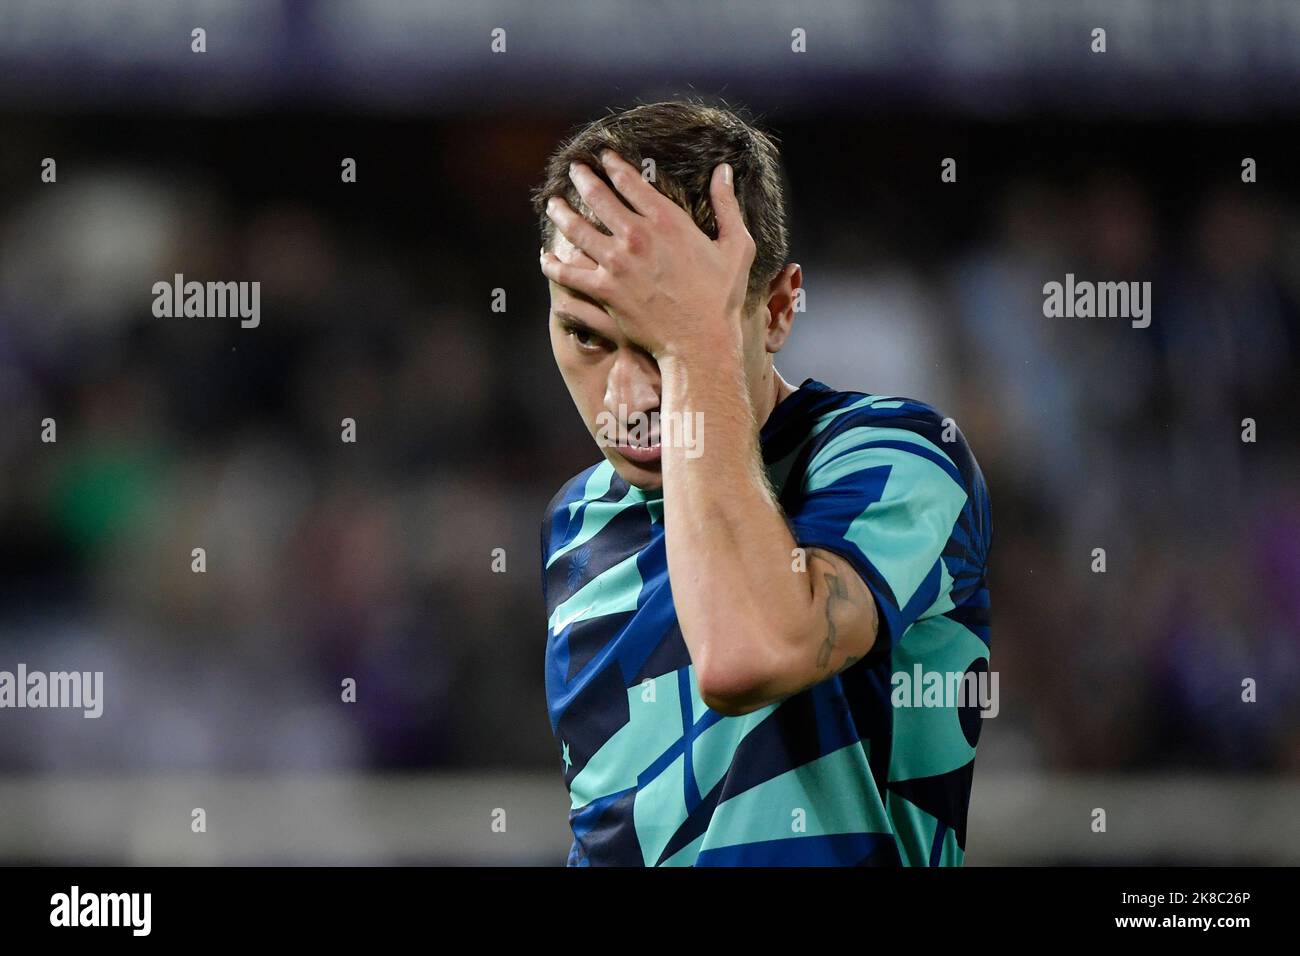 Firenze, Italy. 22nd Oct, 2022. Nicolo Barella of Fc Internazionale during the Serie A football match between ACF Fiorentina and FC Internazionale at Artemio Franchi stadium in Firenze (Italy), October 22th, 2022. Photo Andrea Staccioli/Insidefoto Credit: Insidefoto di andrea staccioli/Alamy Live News Stock Photo